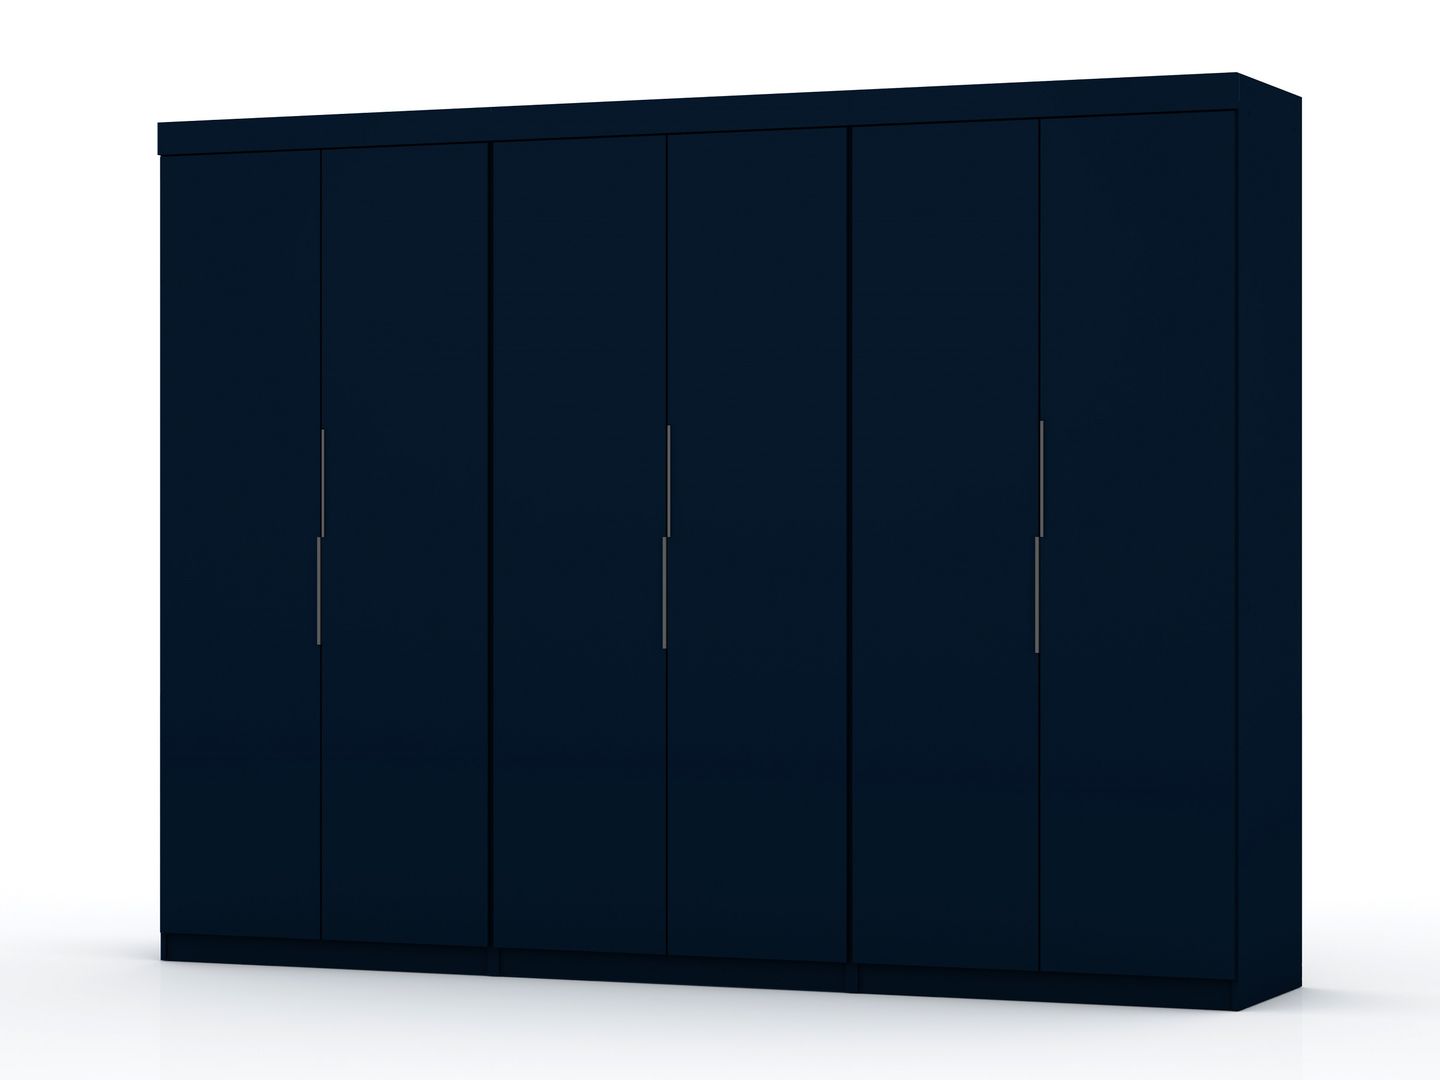 Manhattan Comfort Mulberry 2.0 Modern 3 Sectional Wardrobe Closet with 6 Drawers - Set of 3 in Tatiana Midnight BlueManhattan Comfort-Armoires and Wardrobes - - 1